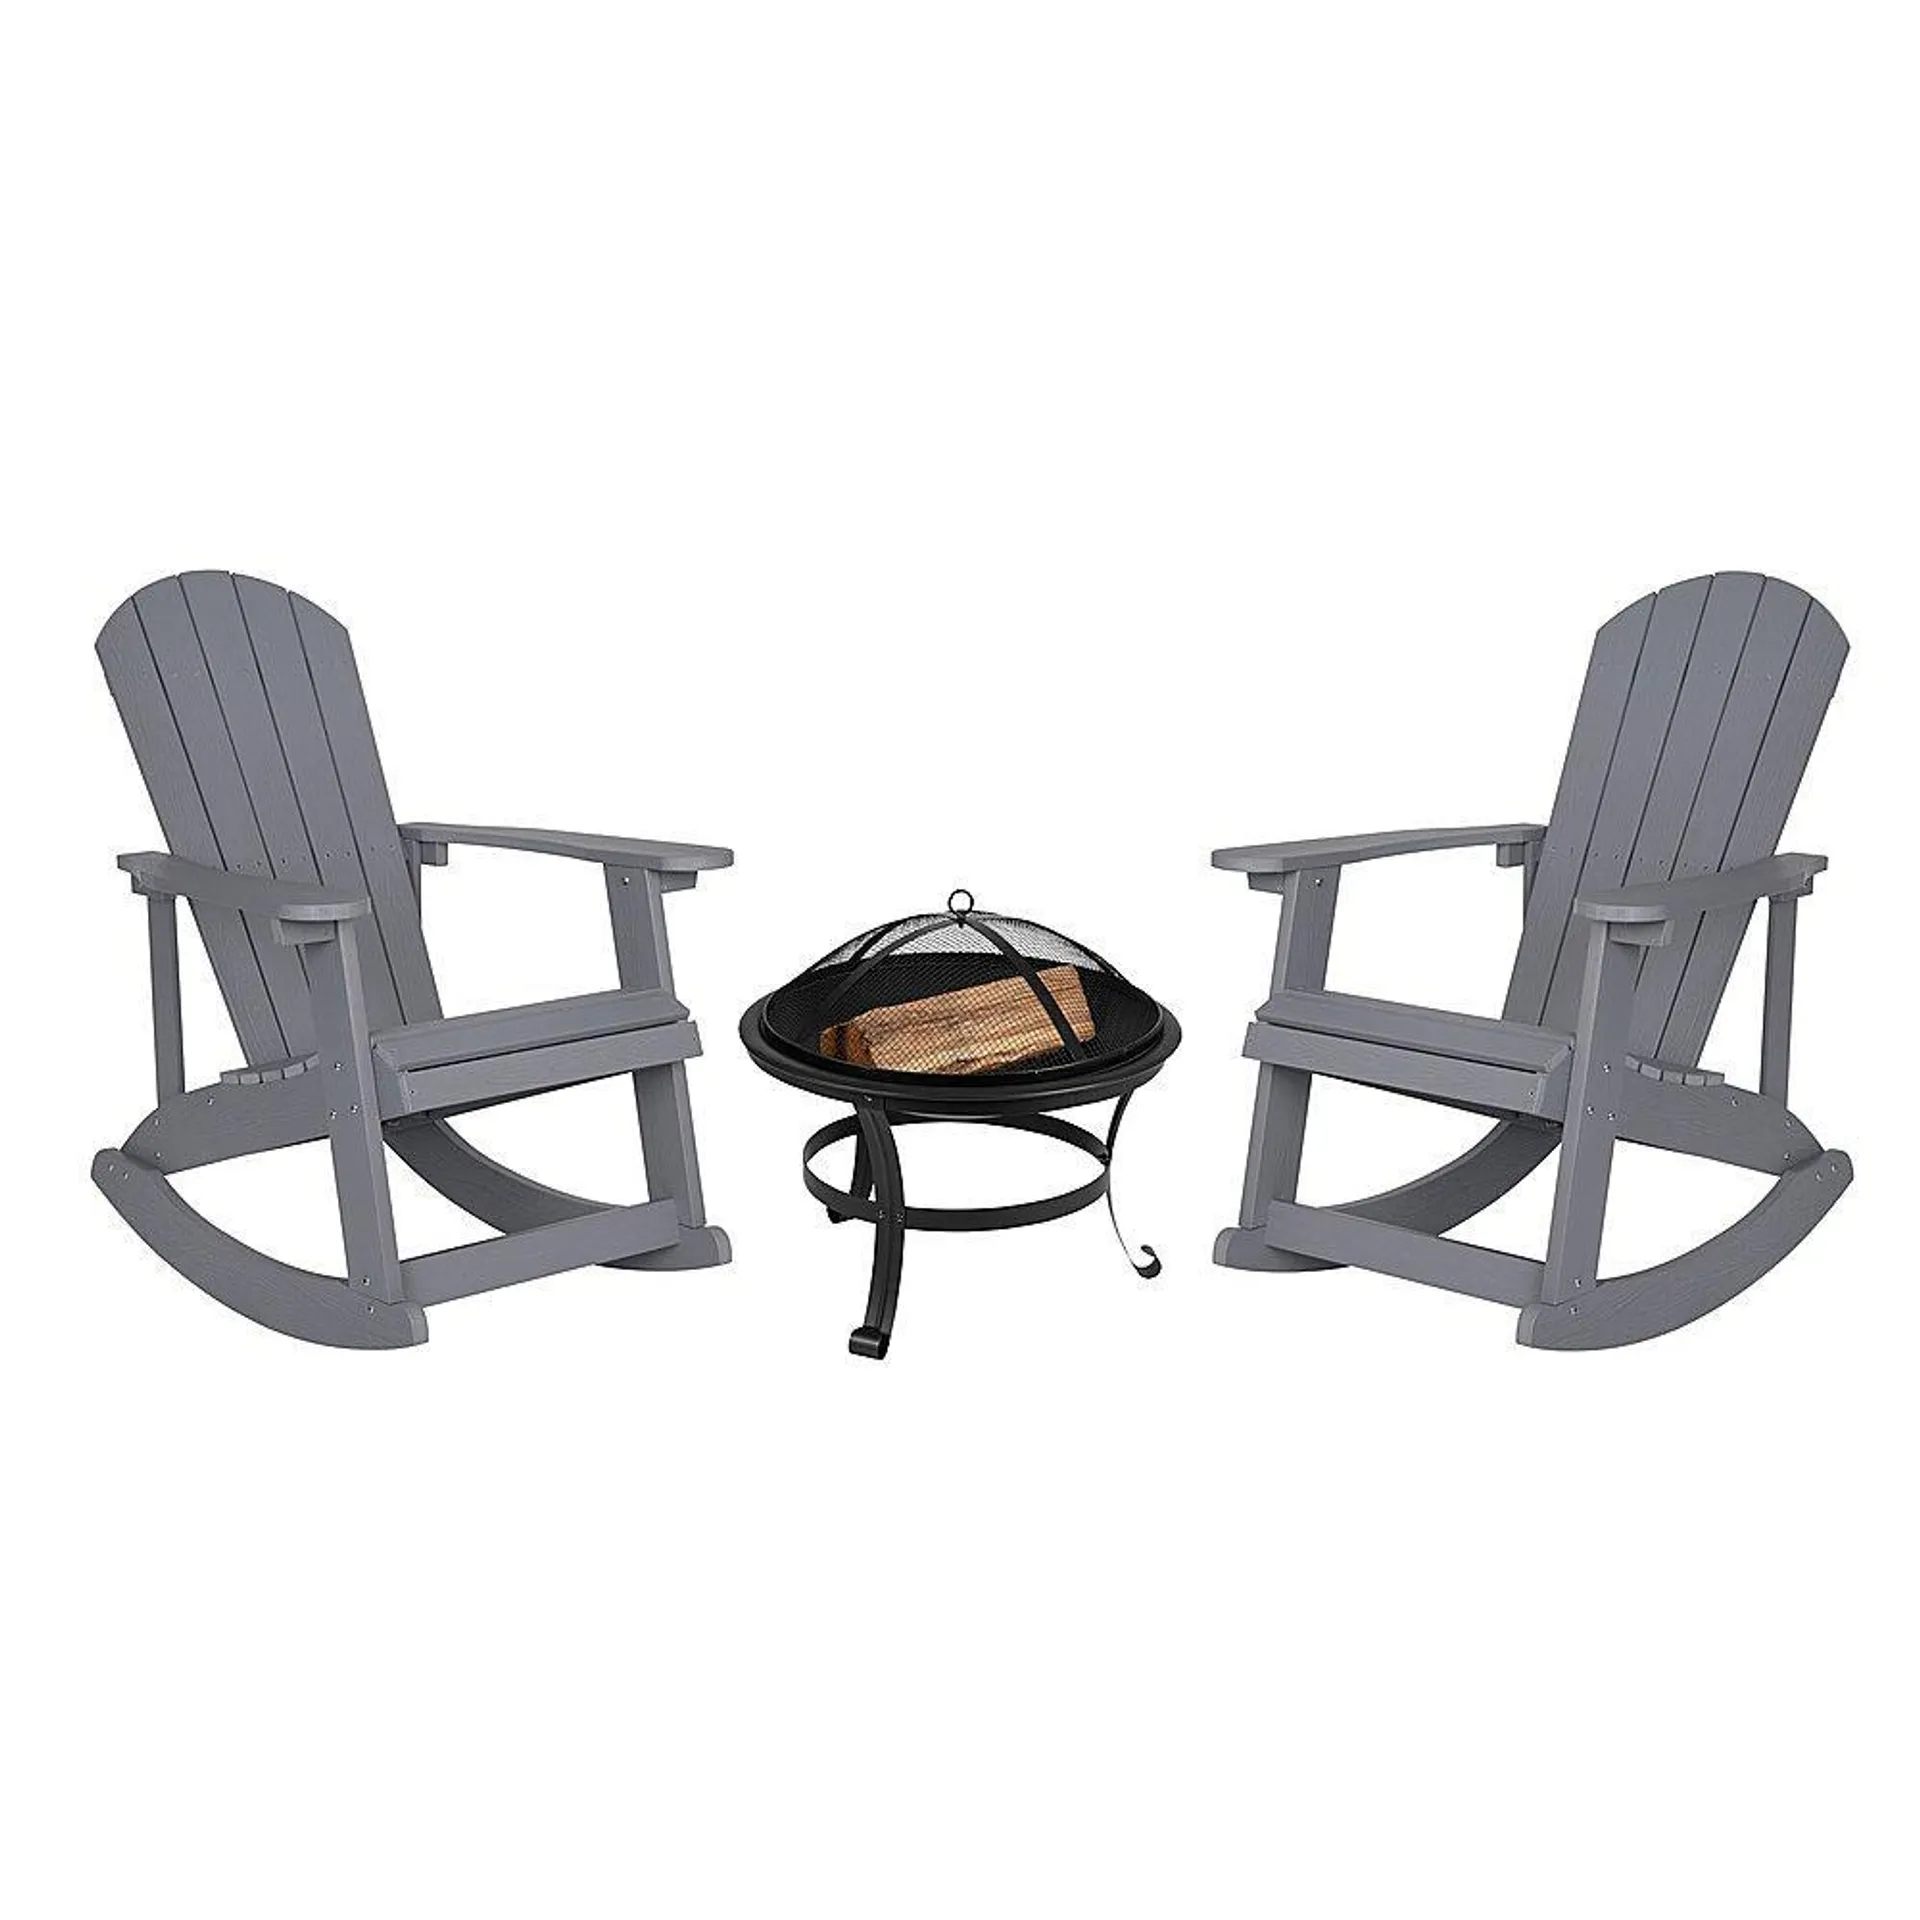 Savannah Rocking Patio Chairs and Fire Pit - Gray